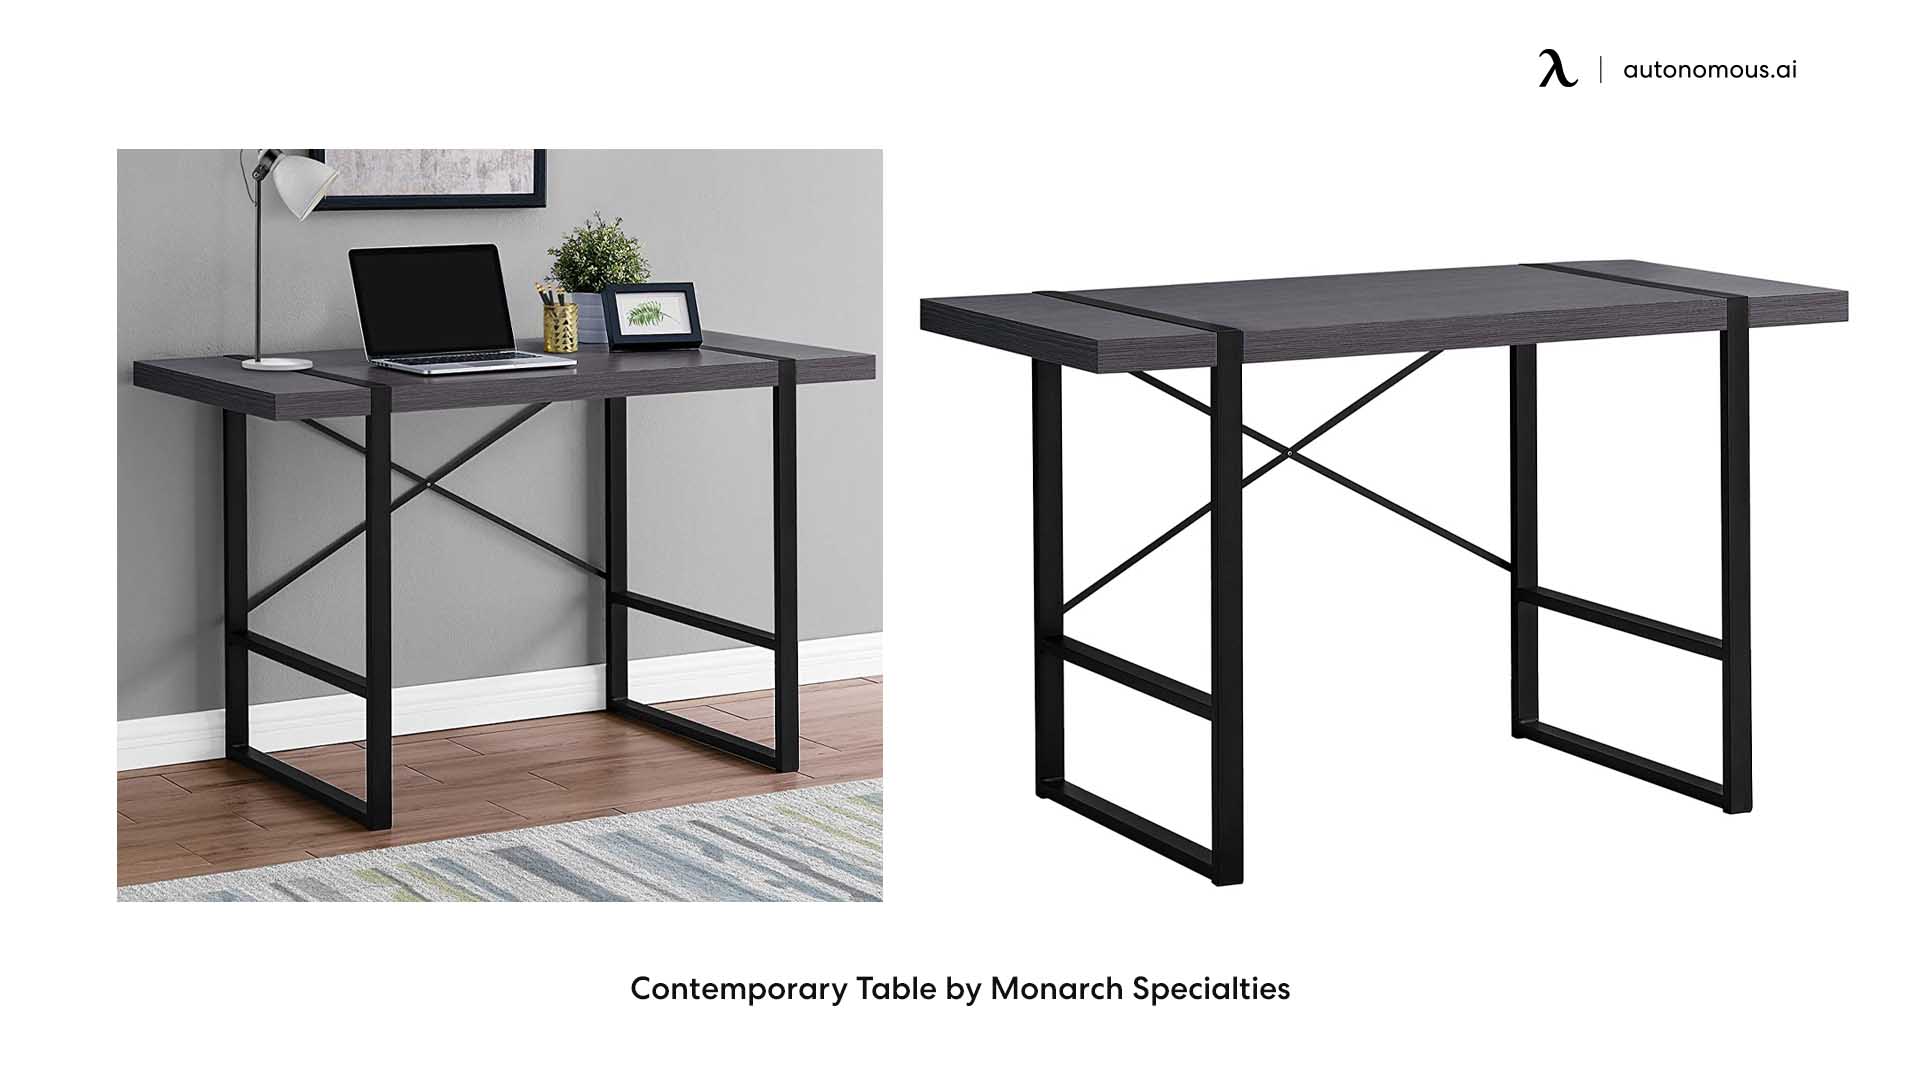 Contemporary wood and metal desk by Monarch Specialties